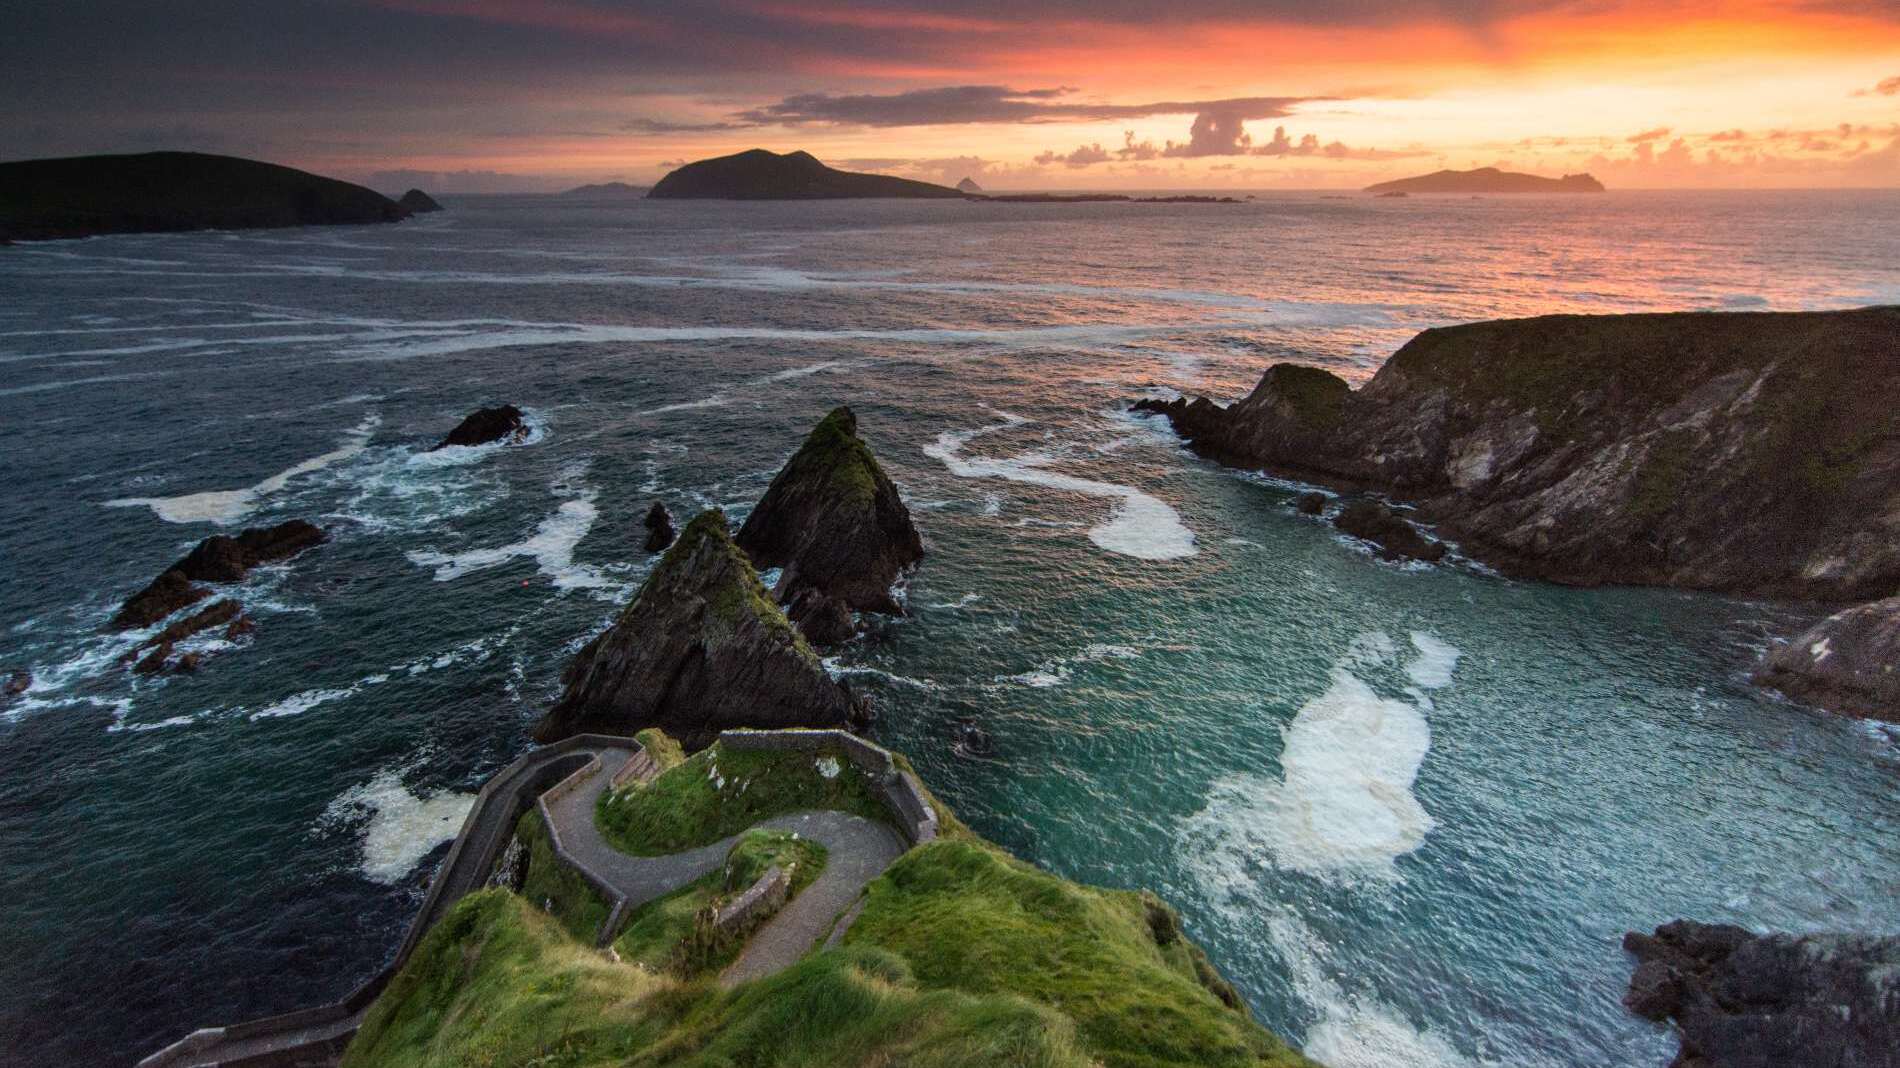 A narrow winding path leads down the cliffs at Dunquin on the Dingle Peninsula © Shutterstock